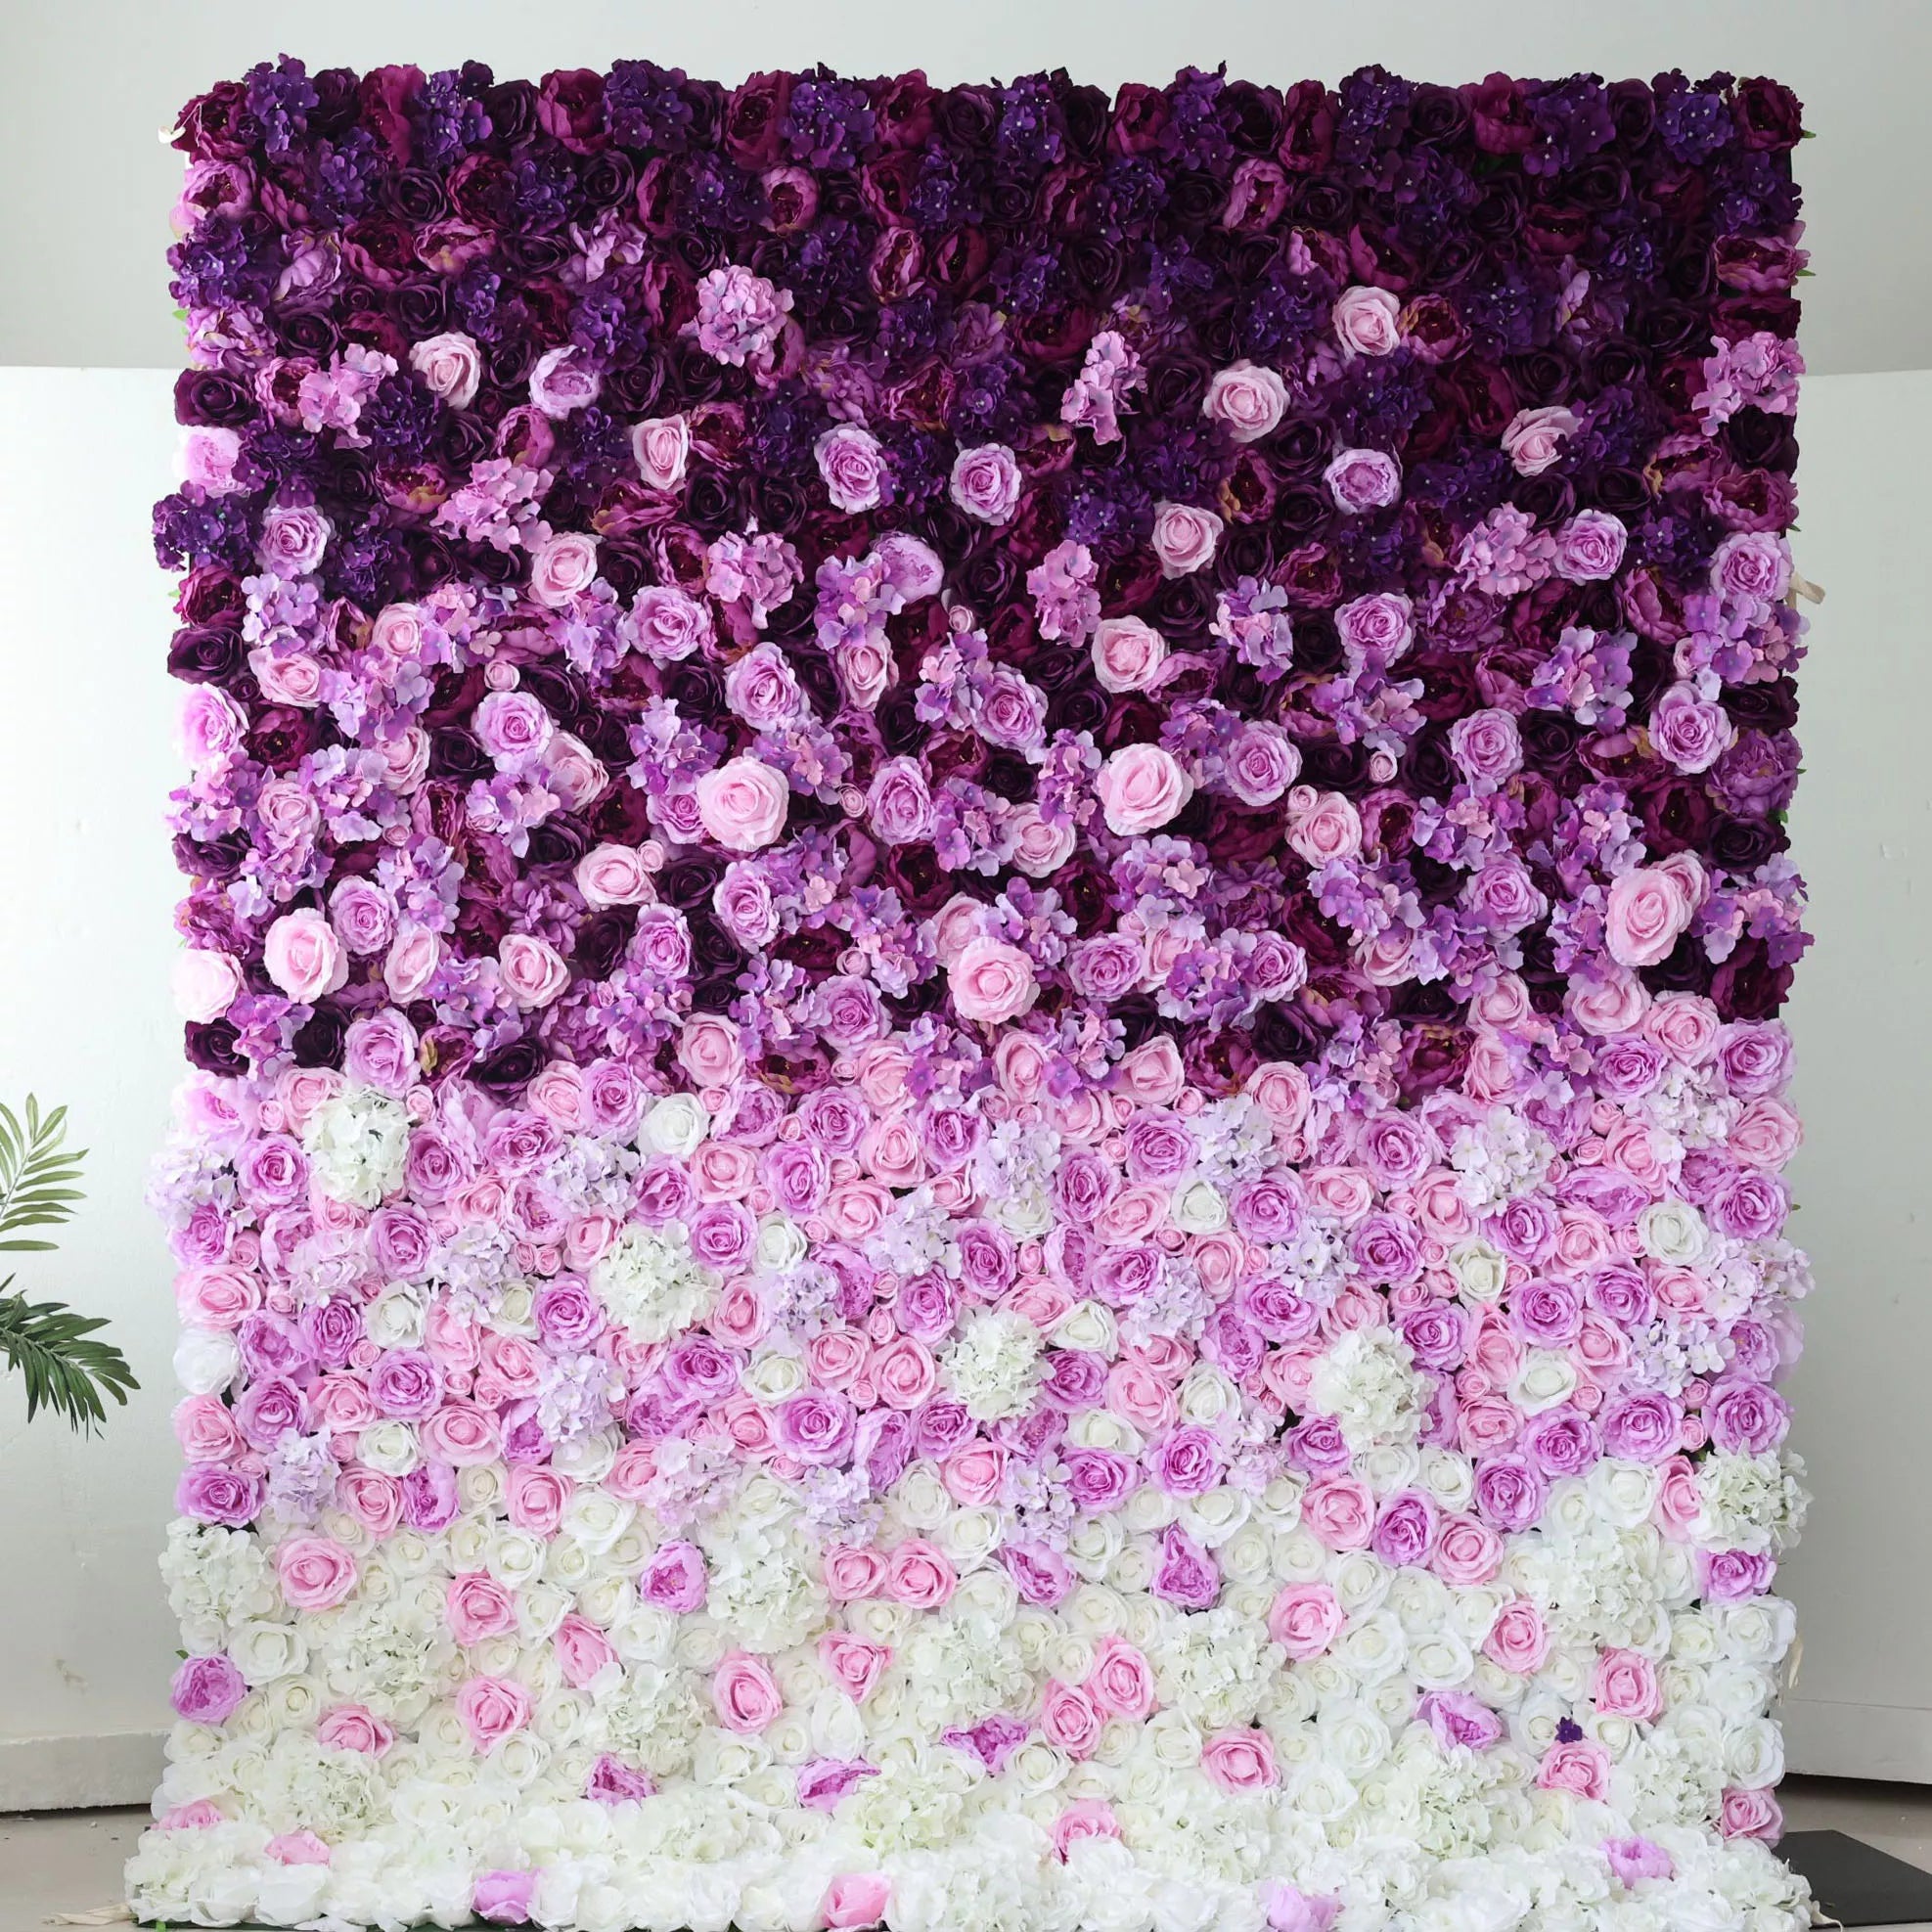 ValarFlowers Backdrop: Explore Purple Passion, a mesmerizing blend of lavender and rose. Vivid purples, soft pinks, and ethereal whites combine, making every event a floral fantasia.